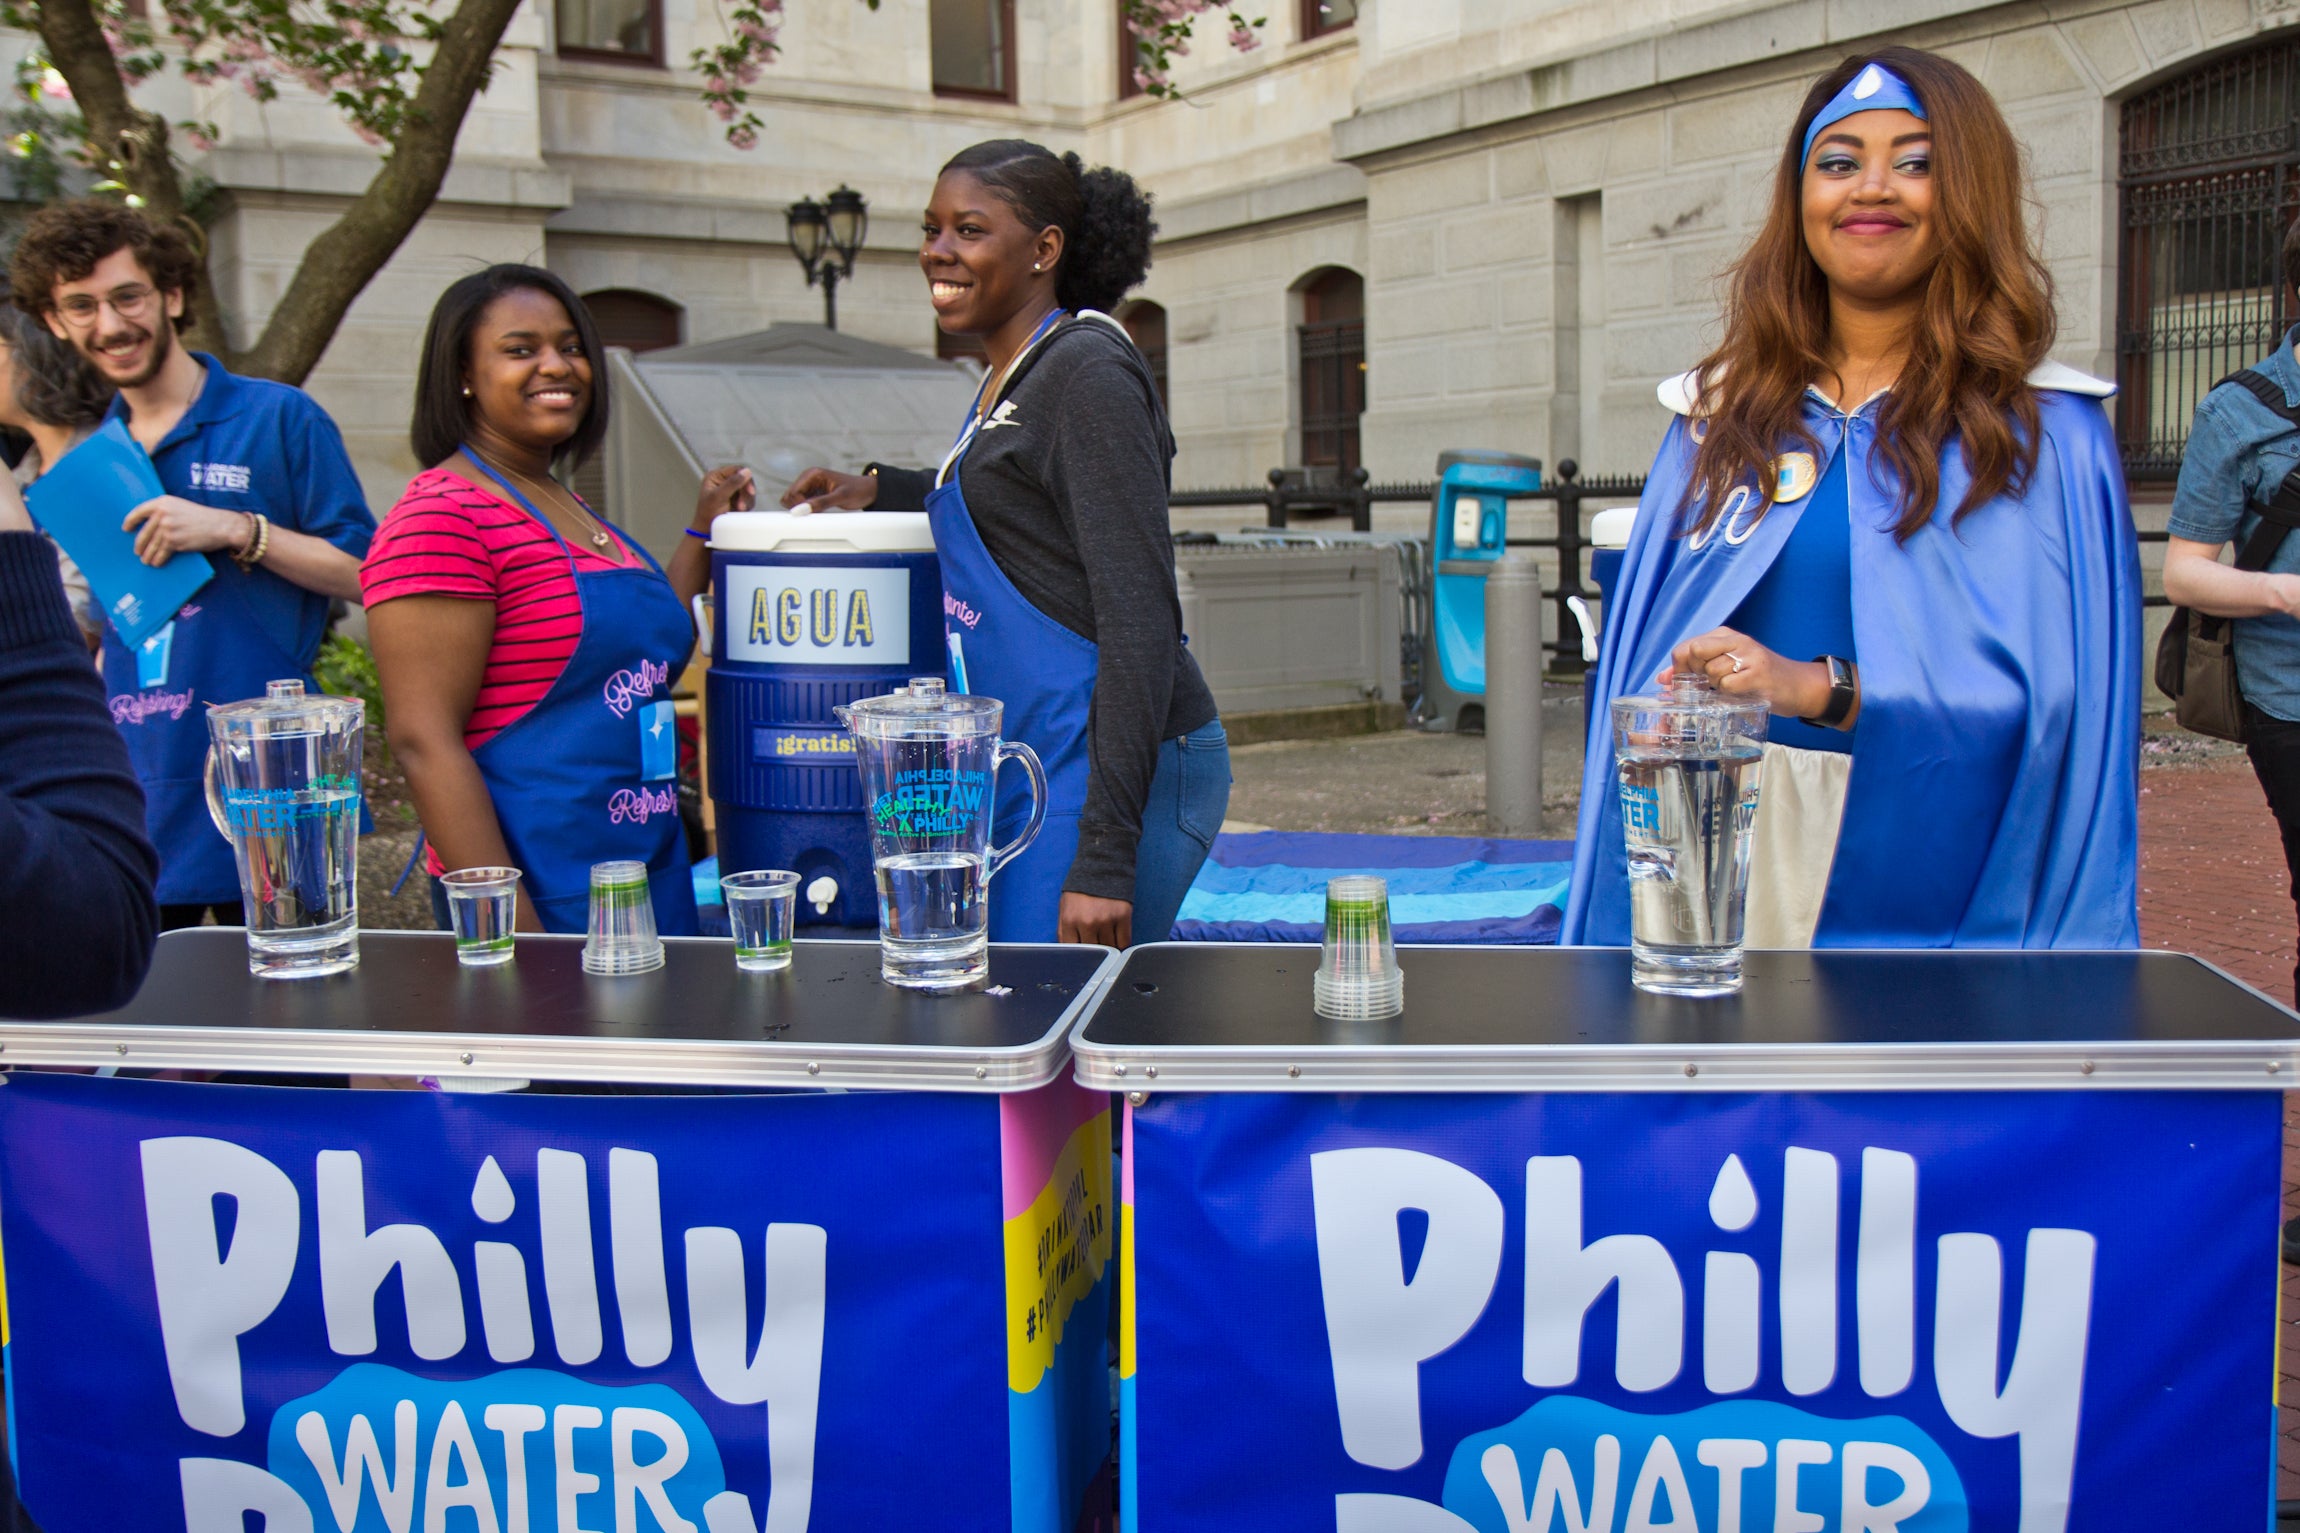 Philly Water Bar Out To Prove That City Tap Is Safe And